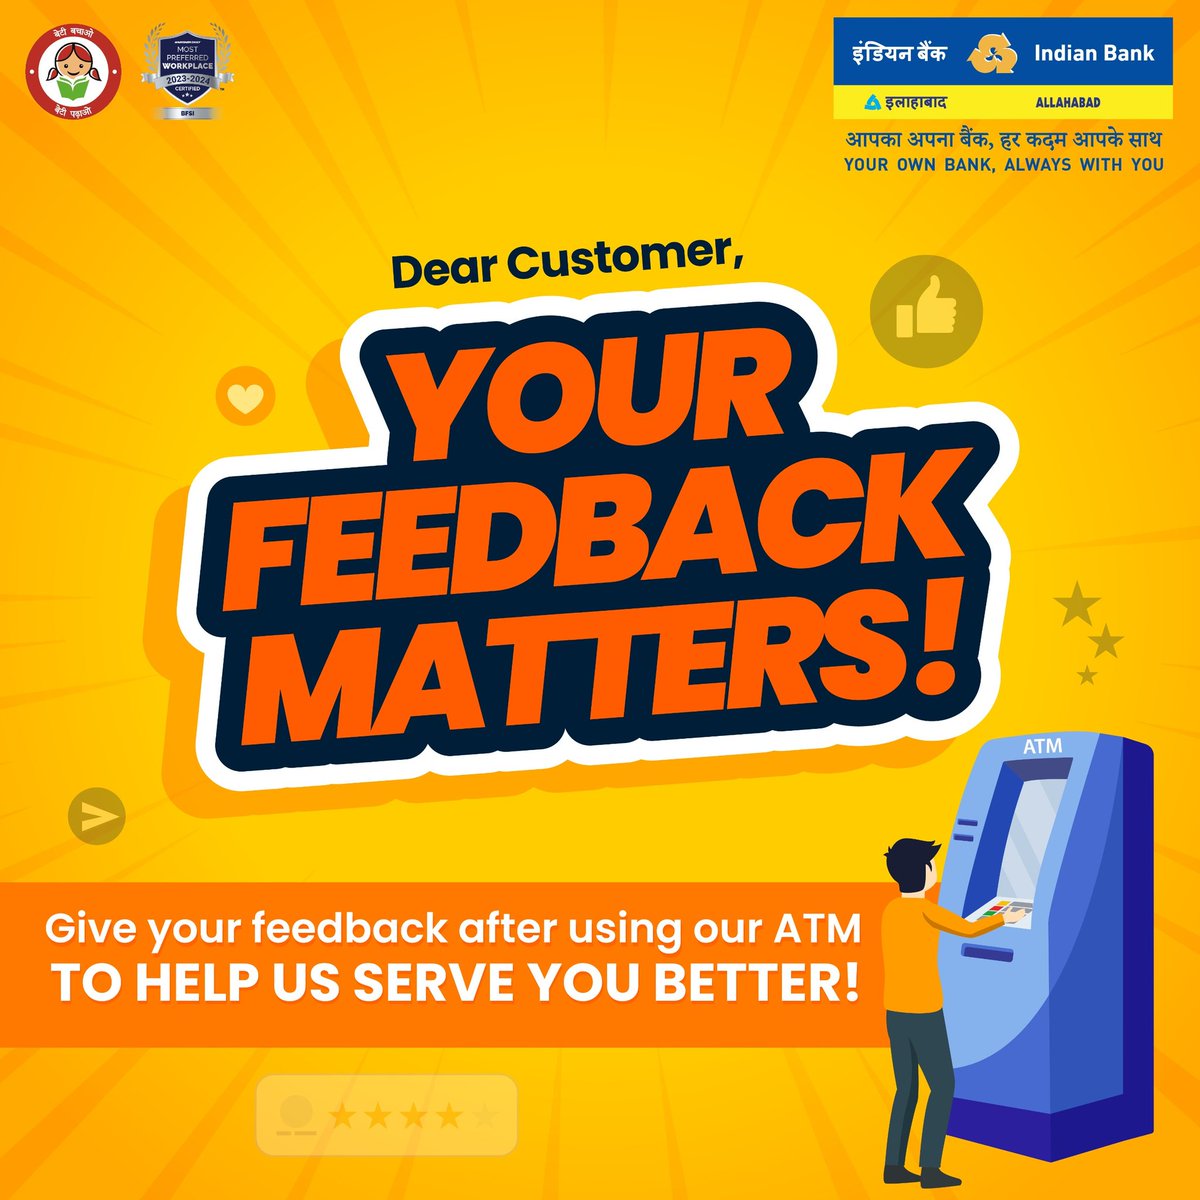 We're eager to hear about your experience at our ATMs. Your feedback helps us serve you better and enhance our services at the same time. #IndianBank @DFS_India